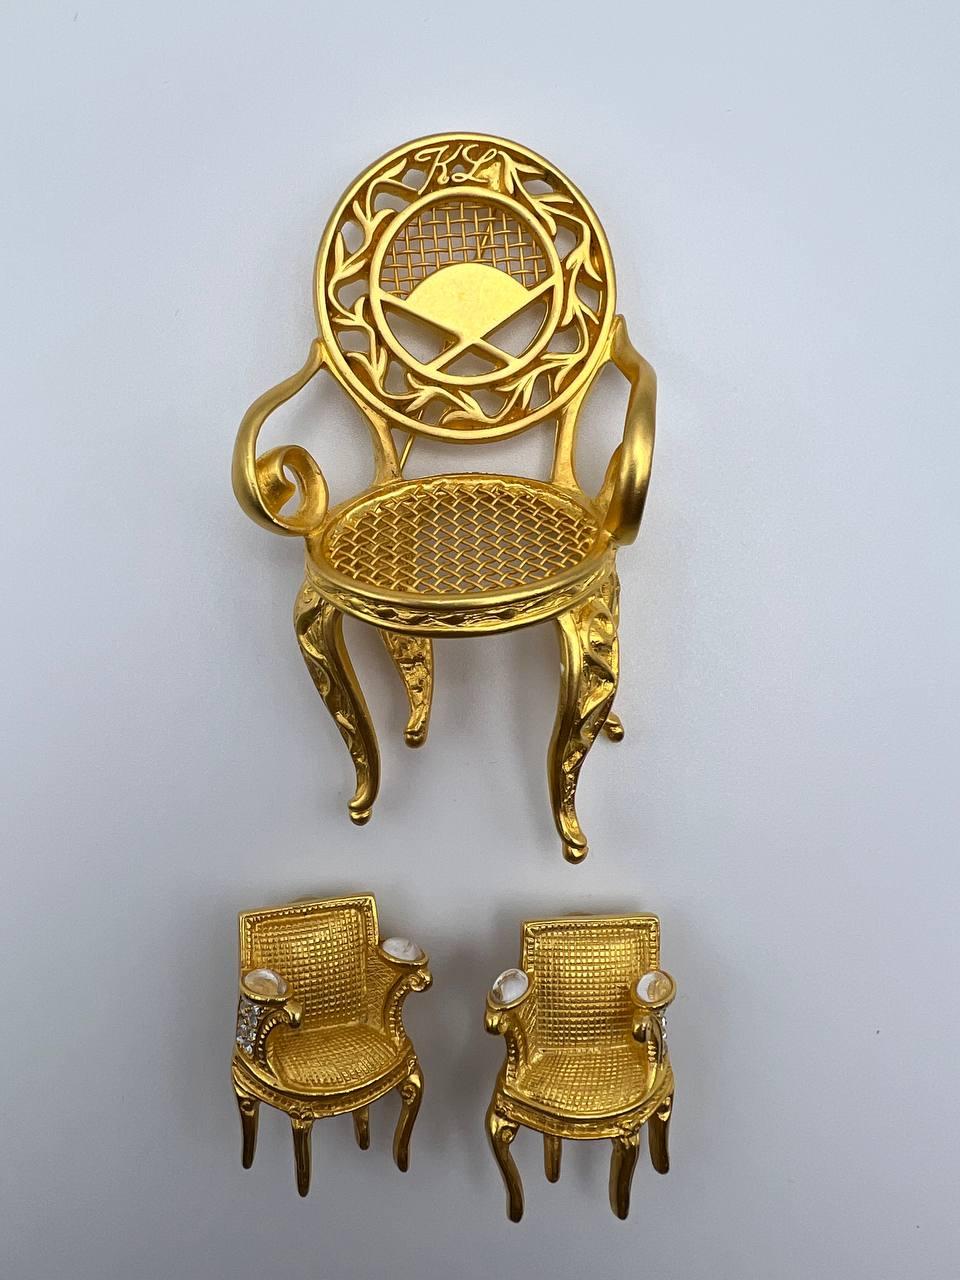 Karl Lagerfeld Rococo Louis XV 24k Gold Chair Brooch, 1980s In Excellent Condition For Sale In New York, NY